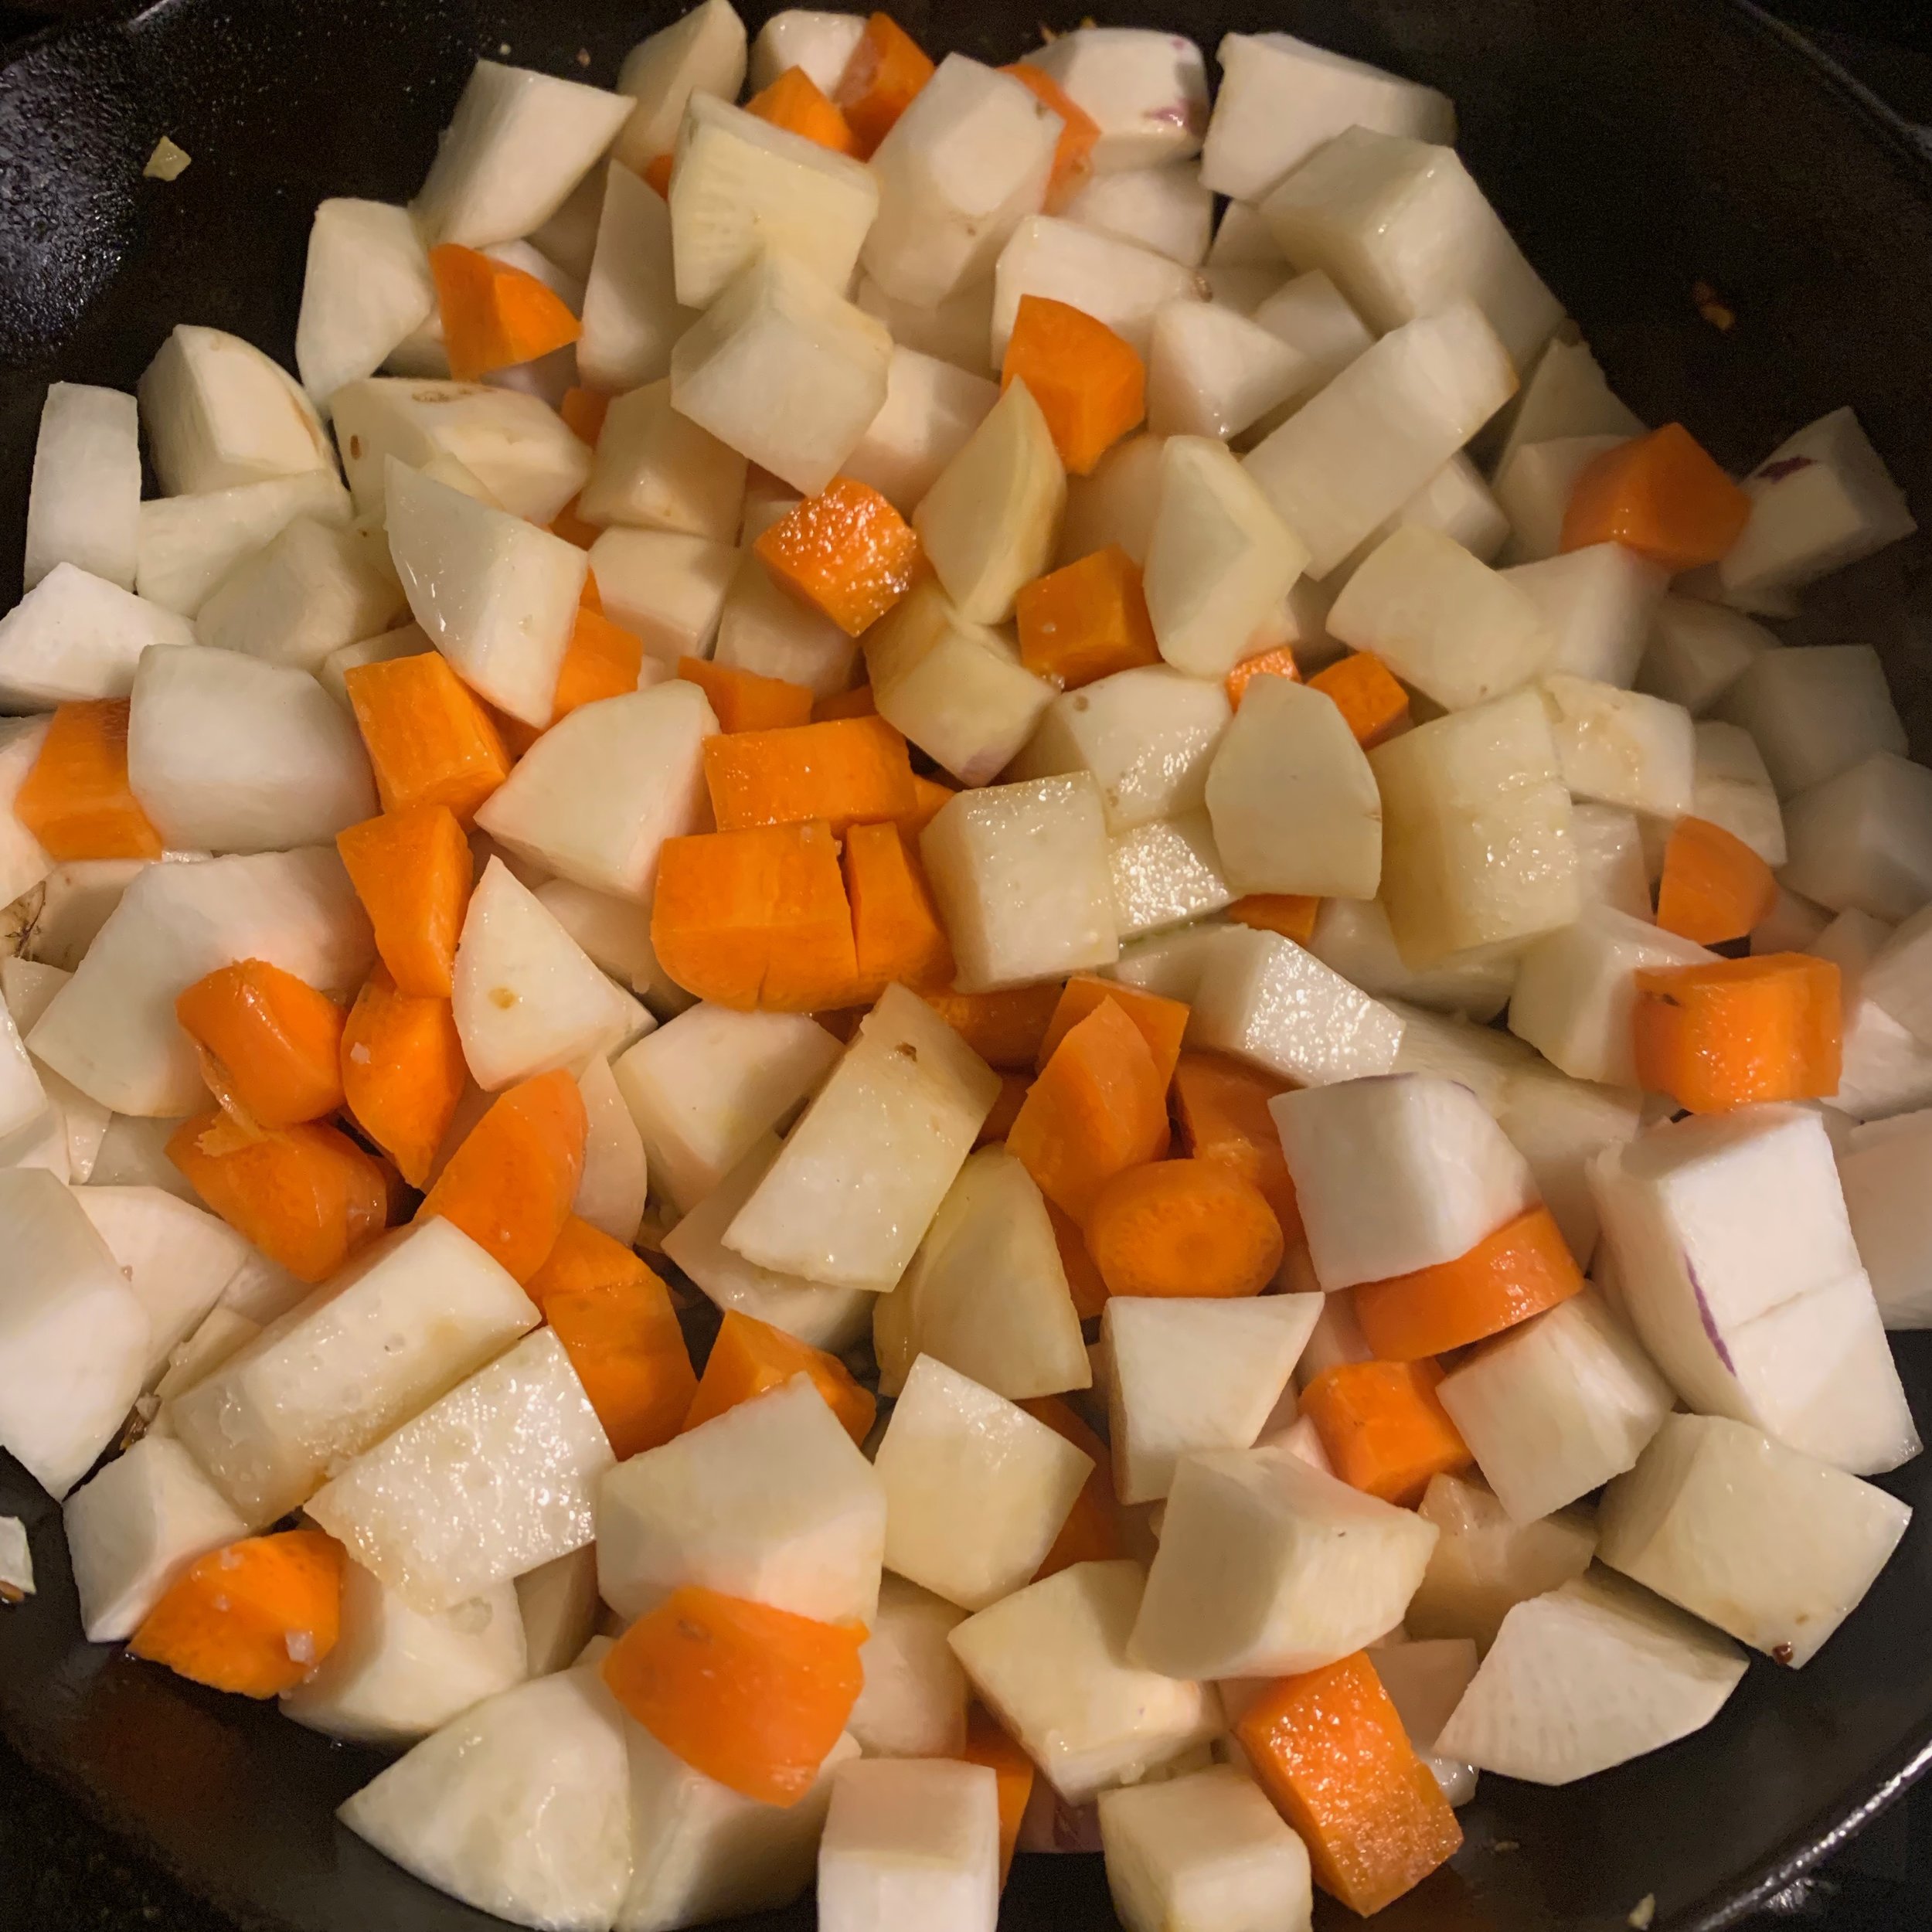 use a white carrot to make the soup even whiter